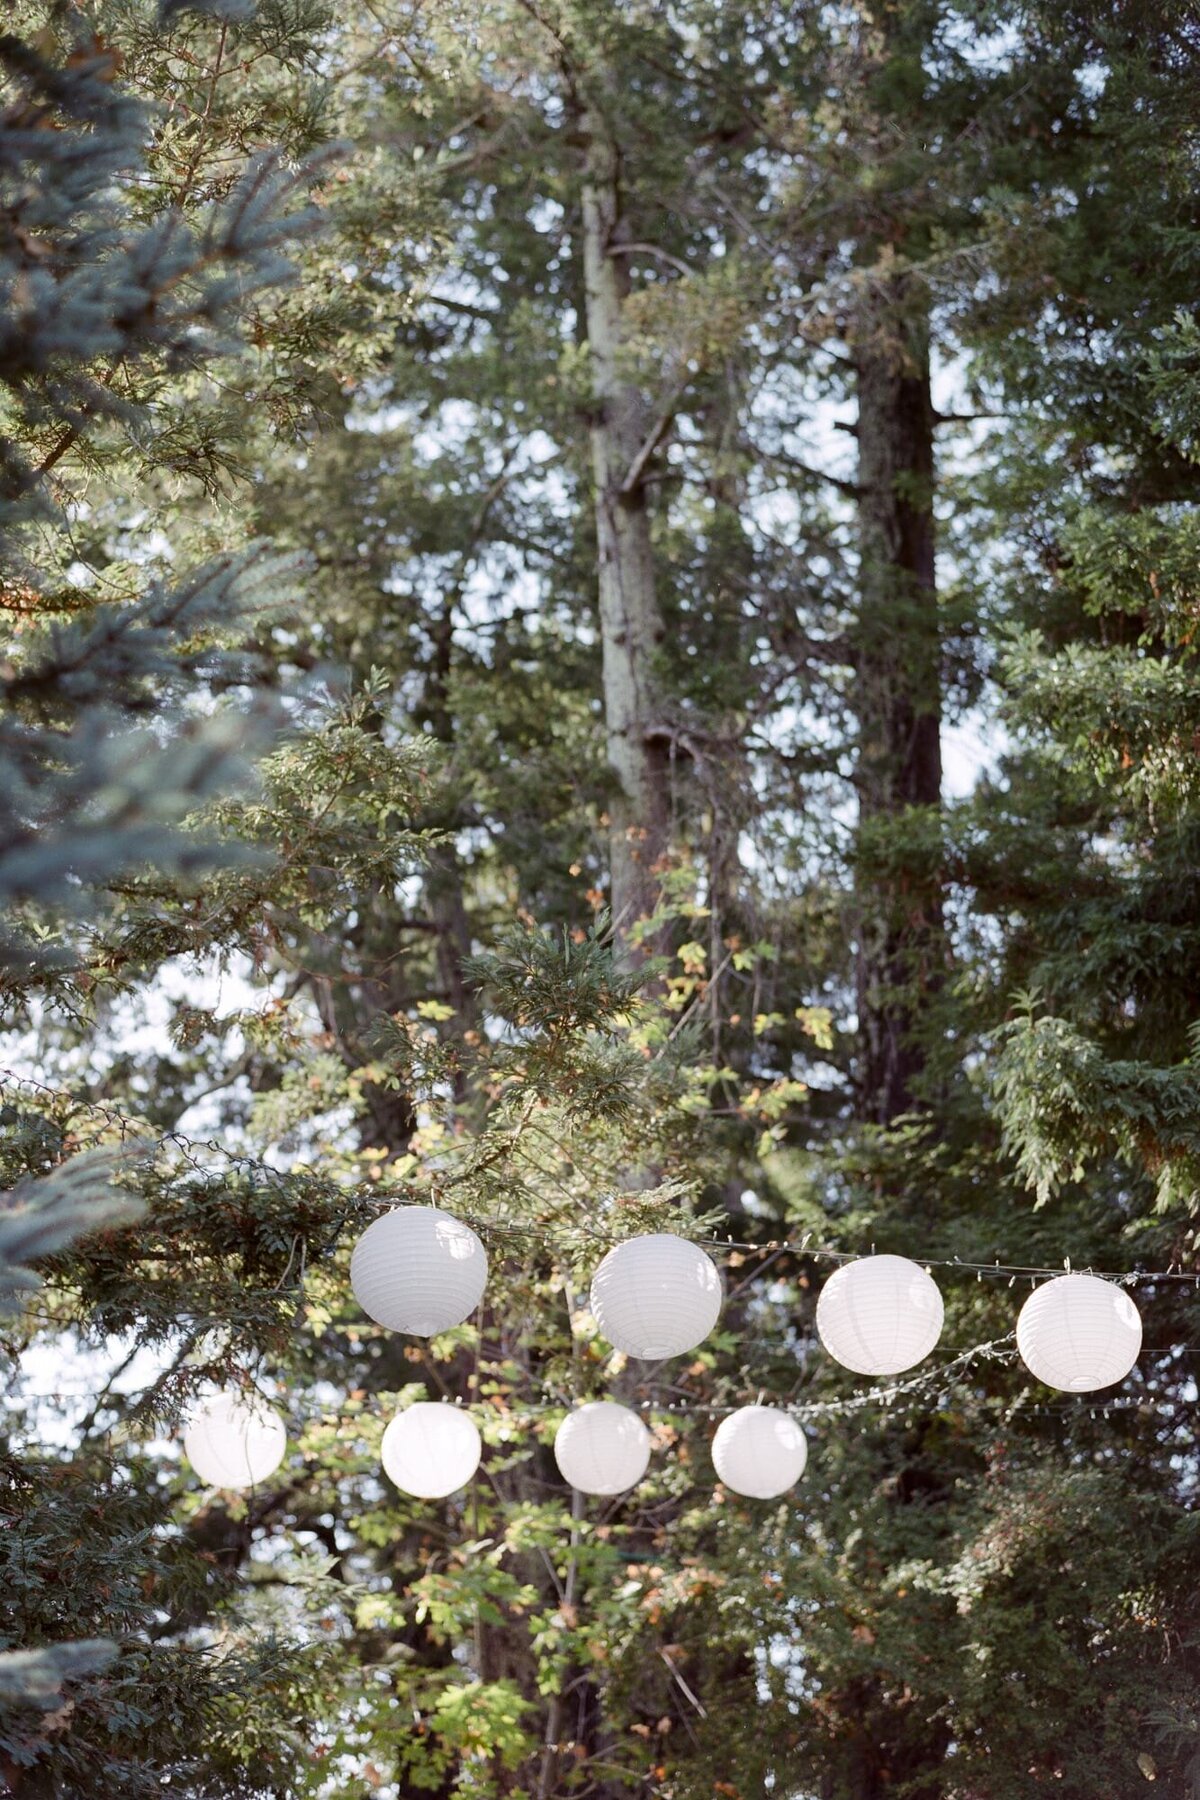 White orb lanterns (paper moon lamps) illuminate the outdoor wedding venue in front of towering pine and fir trees.